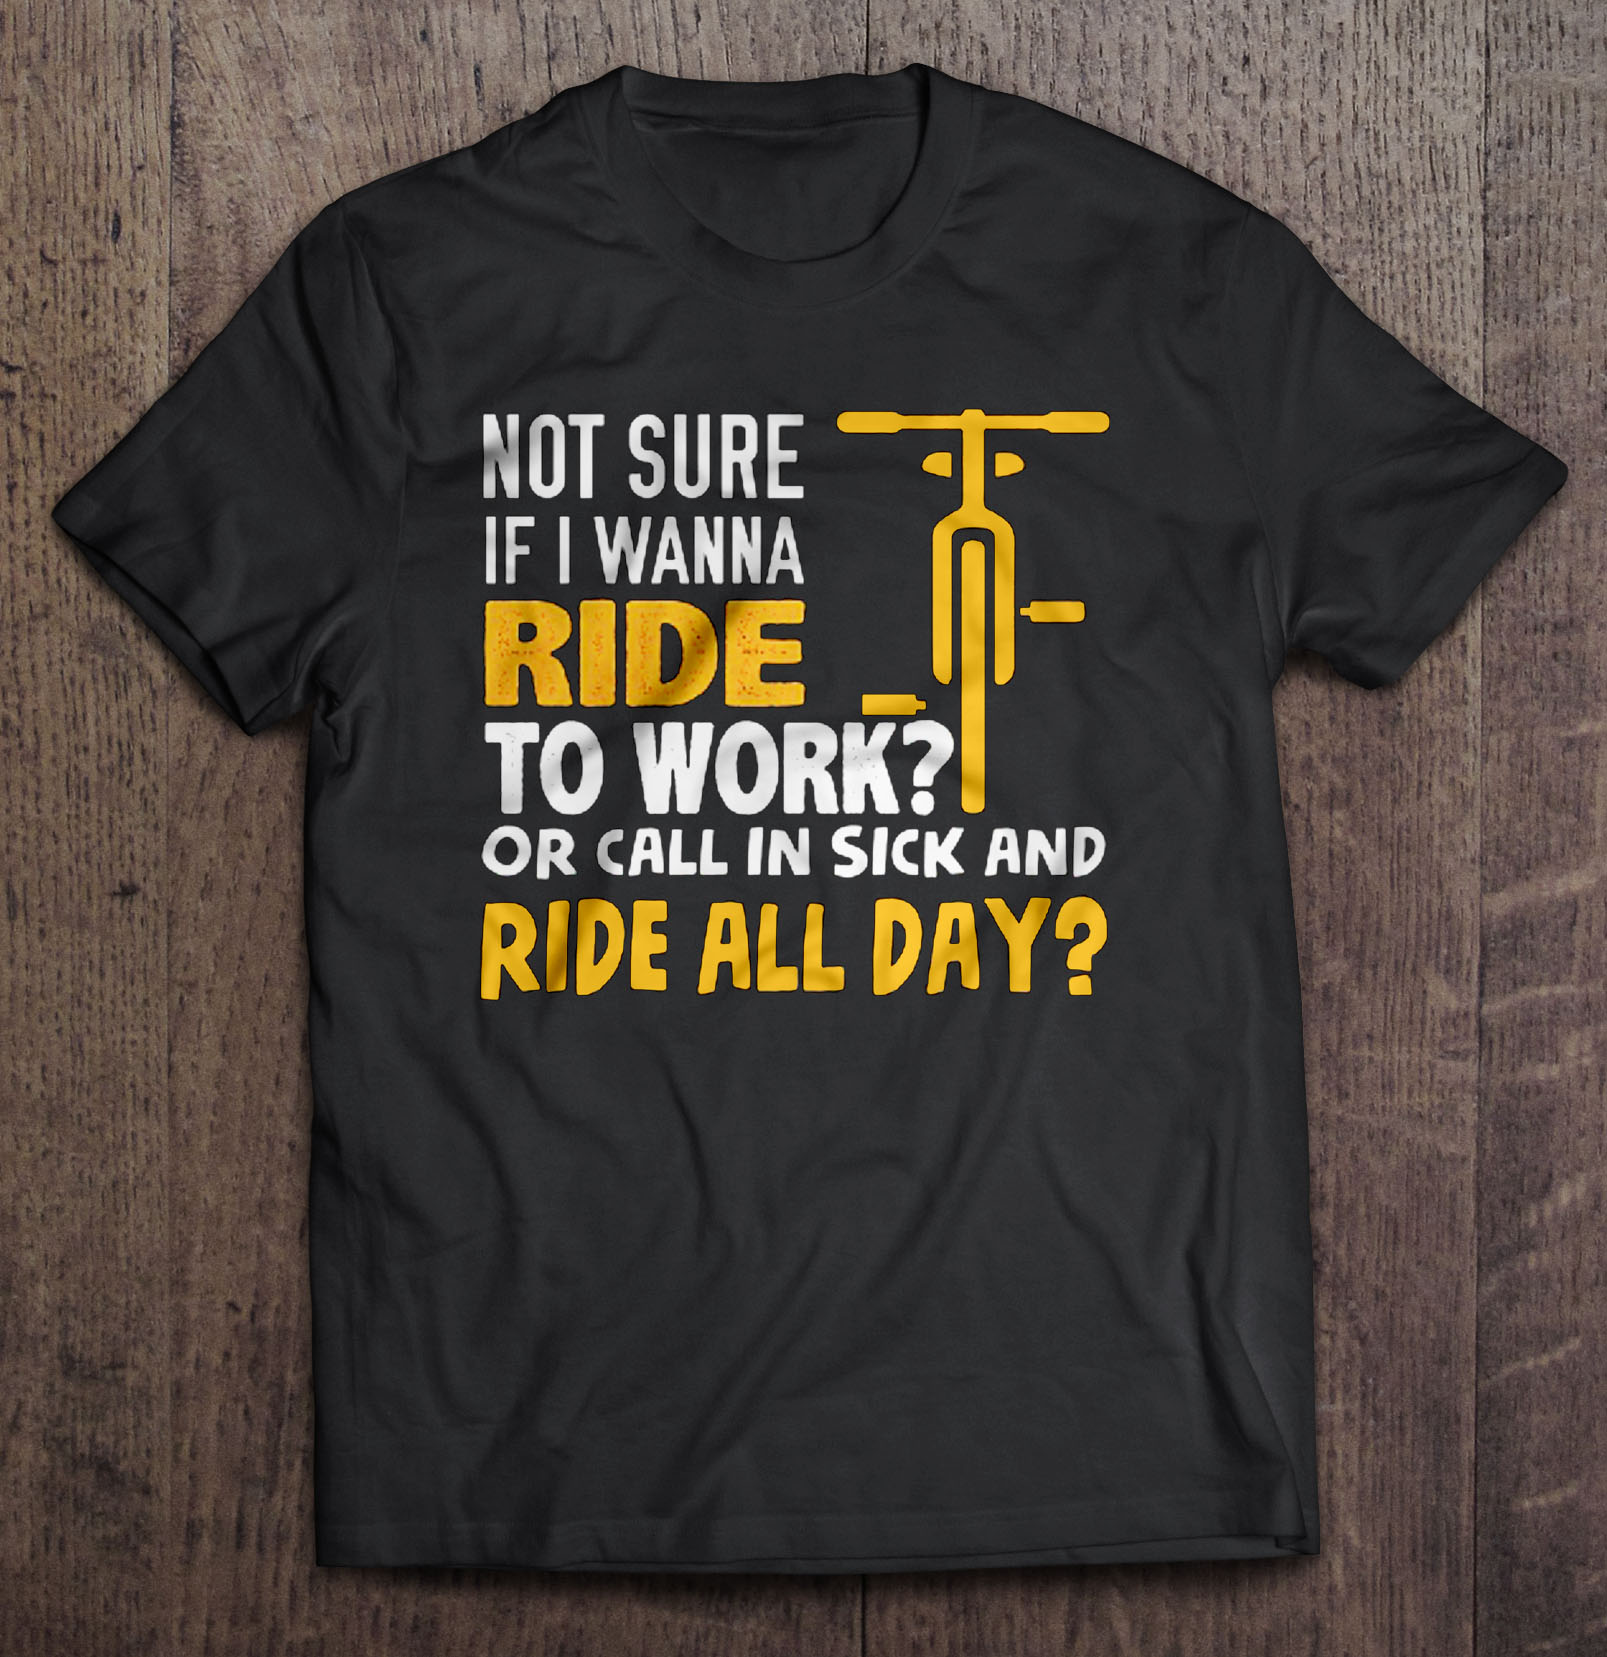 Not sure if I wanna Ride to work or call in sick and Ride all day ...